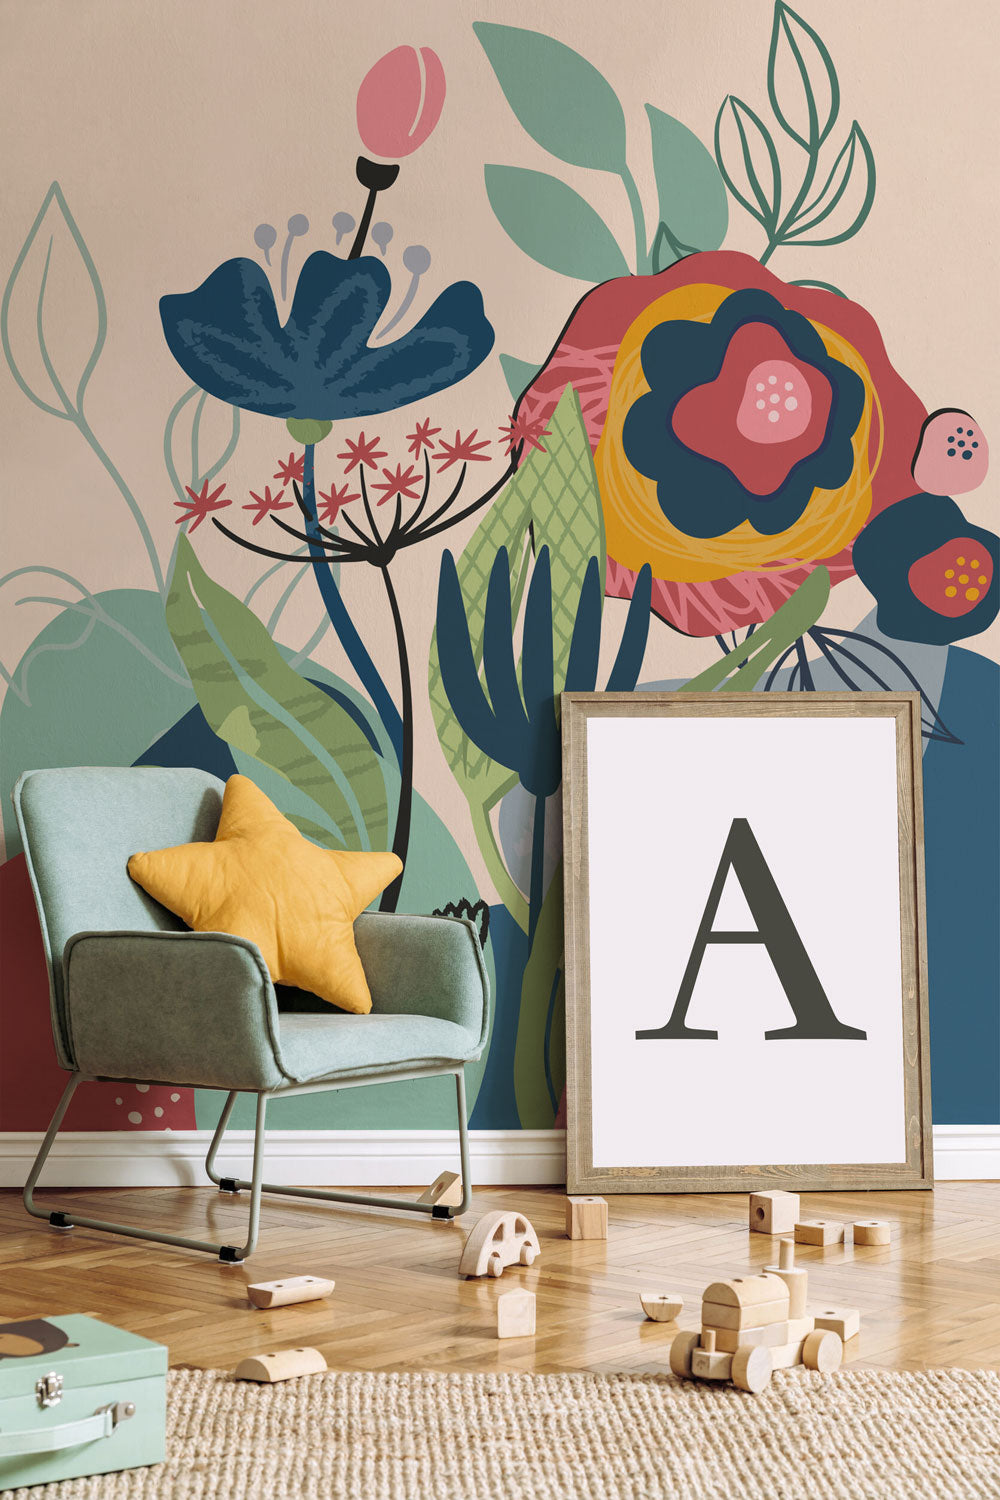 Abstract Floral Card 3 Wall Mural